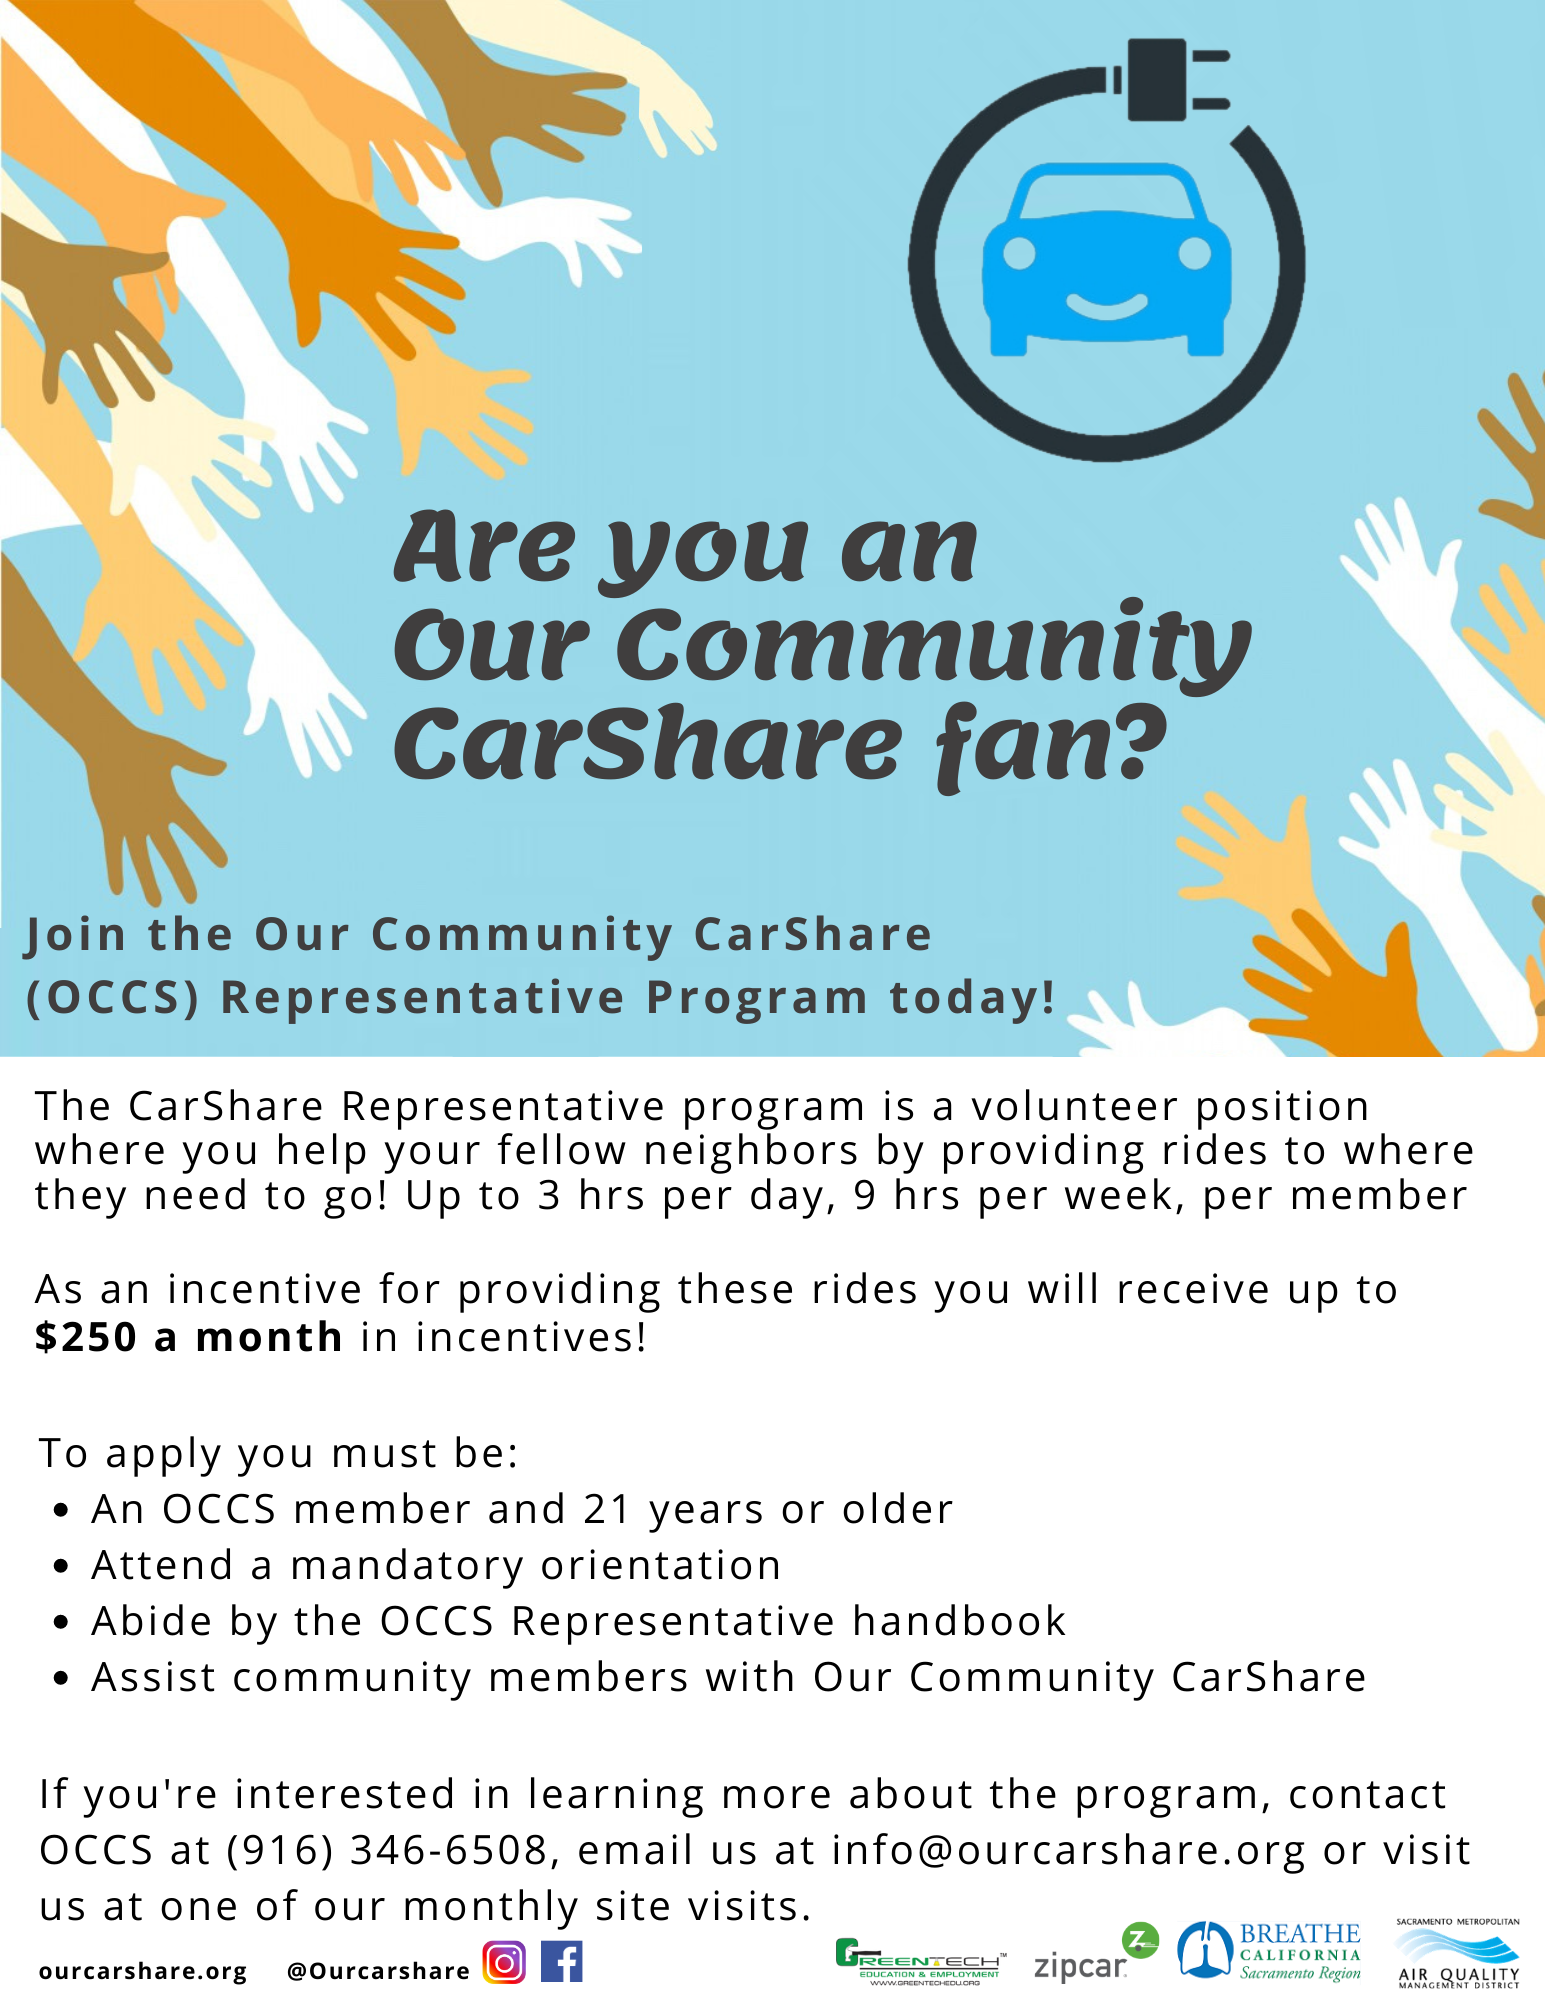 Request for OurCarshare representatives